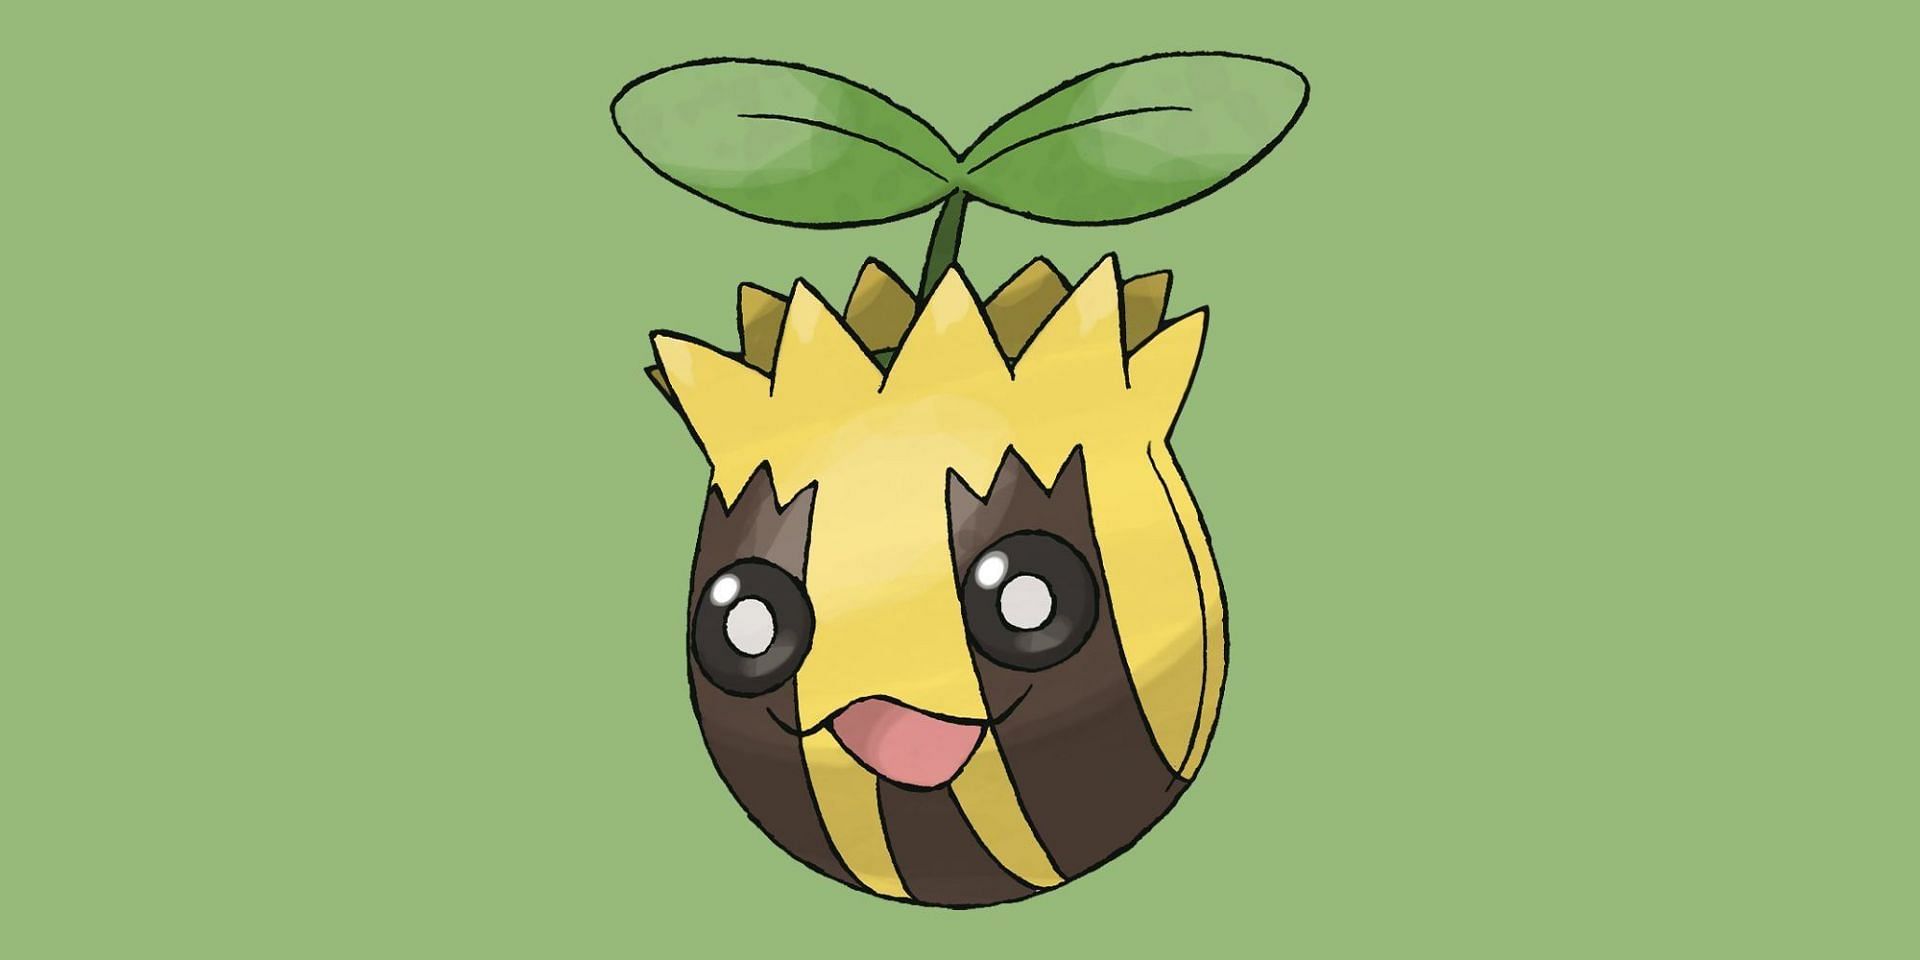 Sunkern has been unimposing for much of its existence, dating back to Generation II (Image via The Pokemon Company)